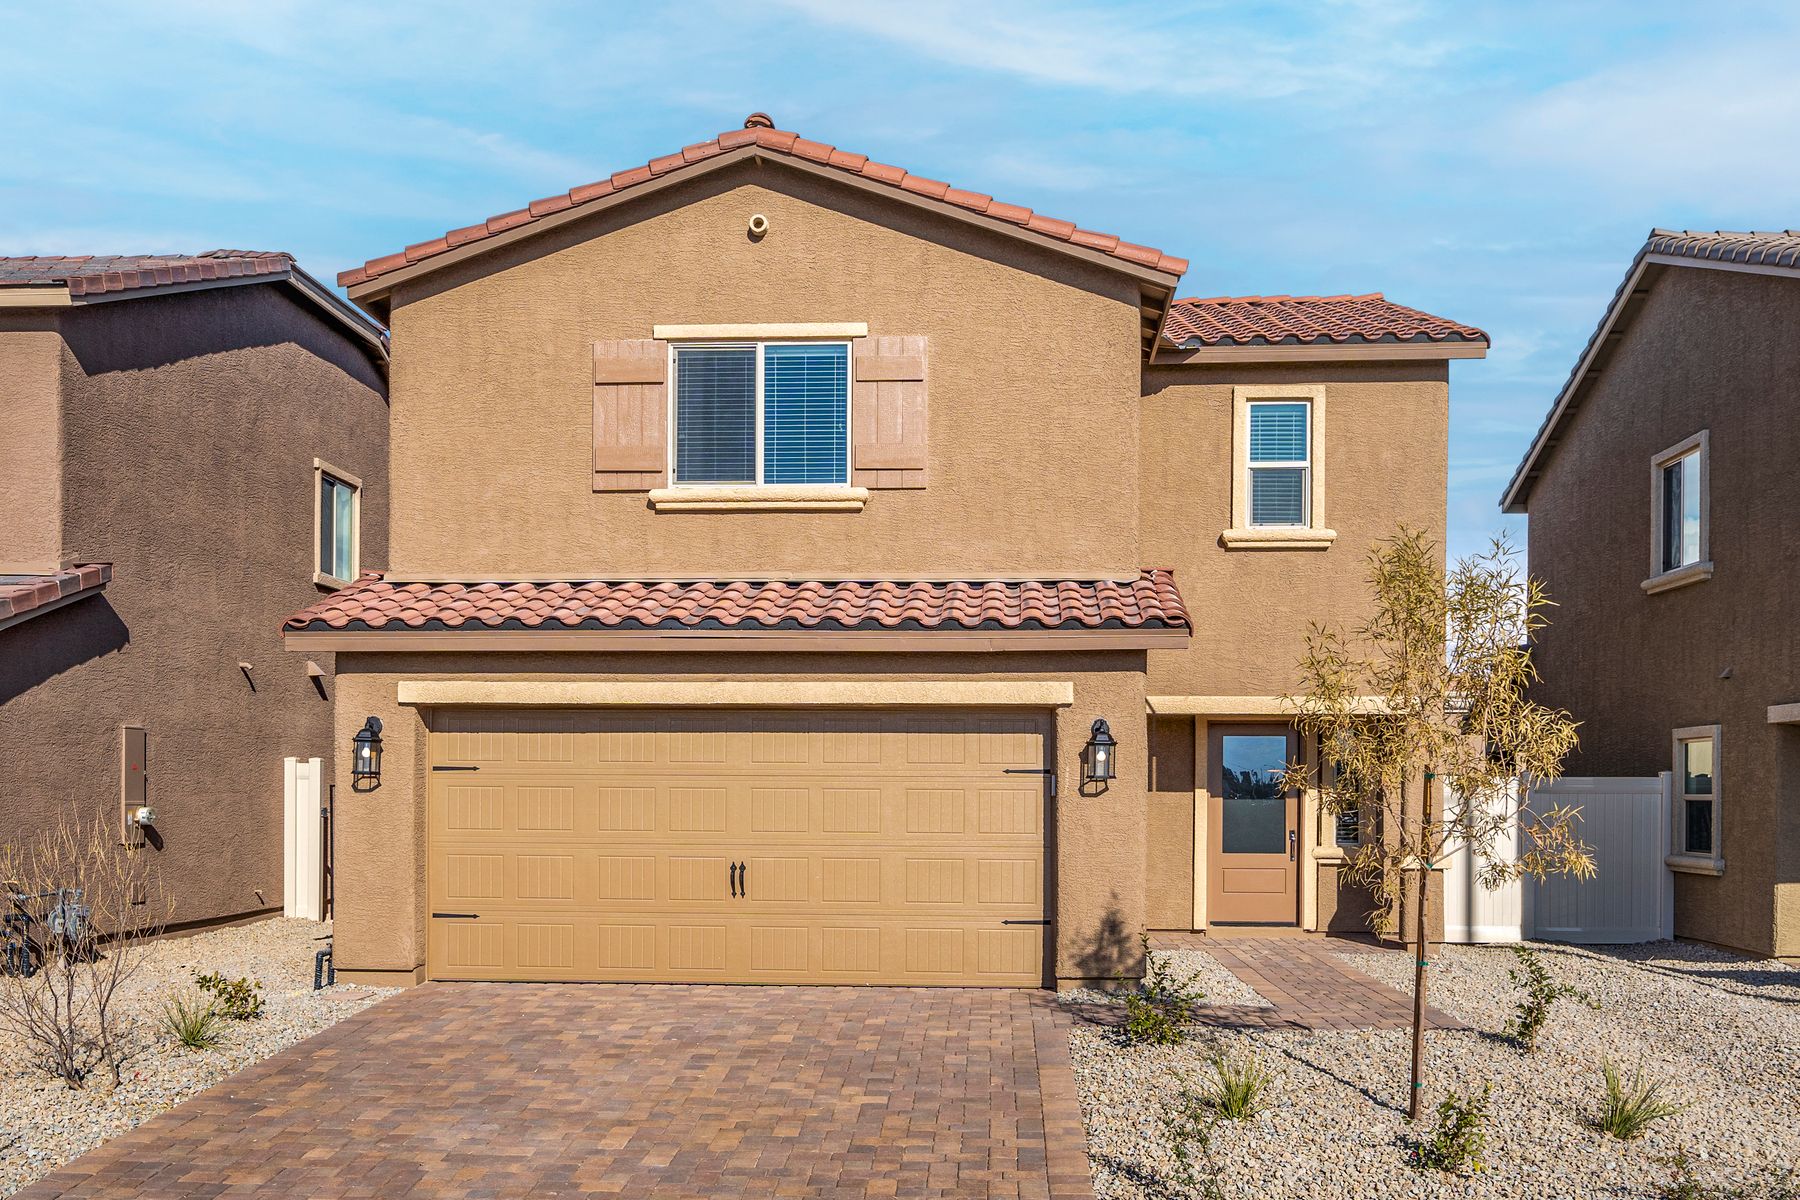 Sienna Square by LGI Homes:LGI Homes offers two story homes with stucco exteriors at Sienna Square!